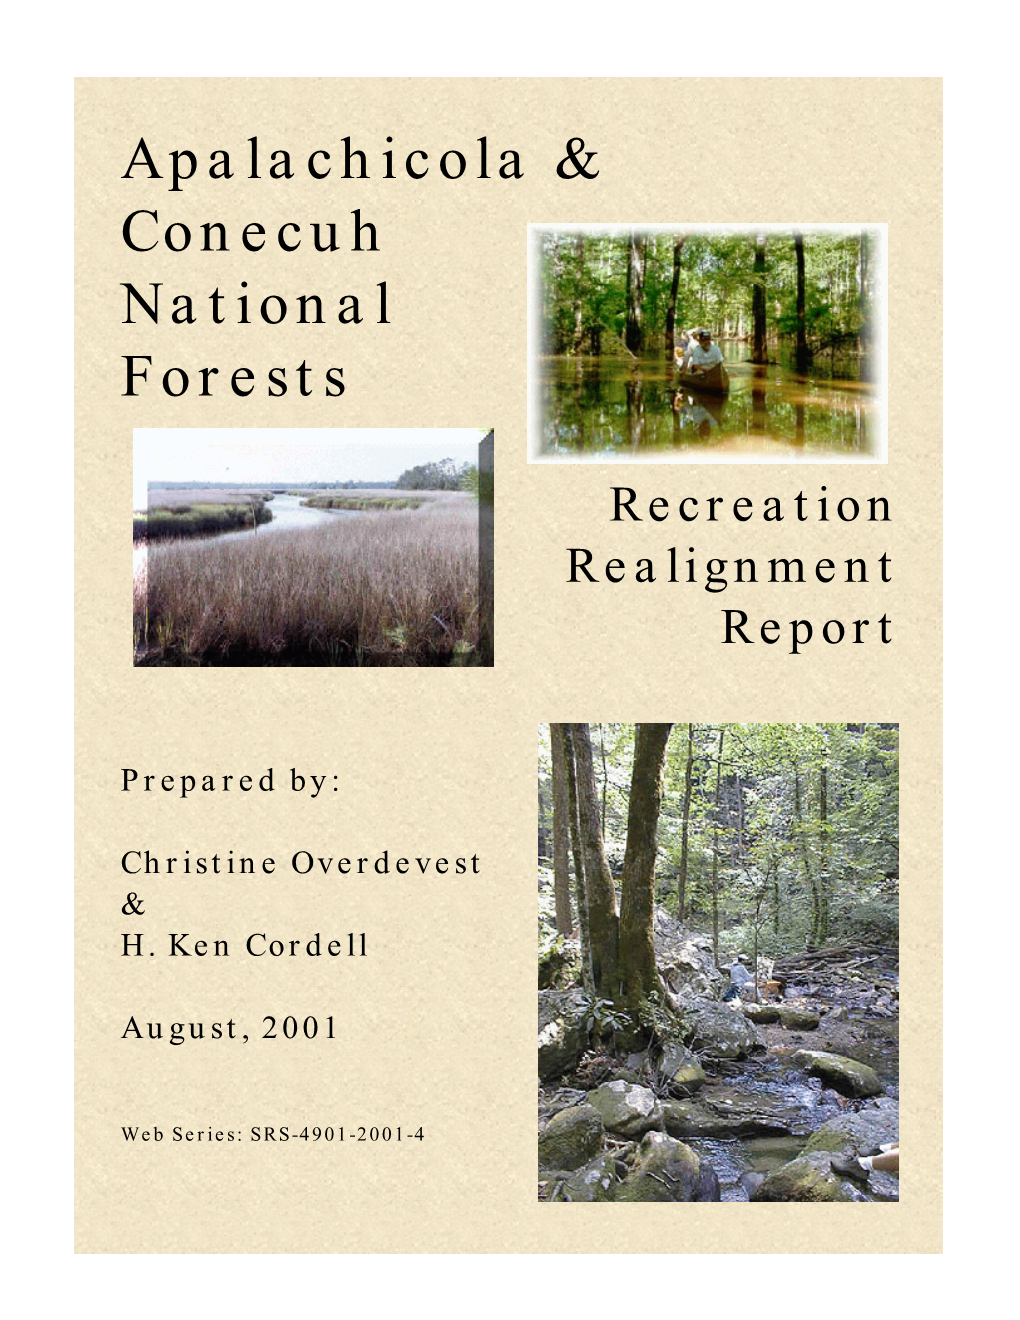 Apalachicola & Conecuh National Forests